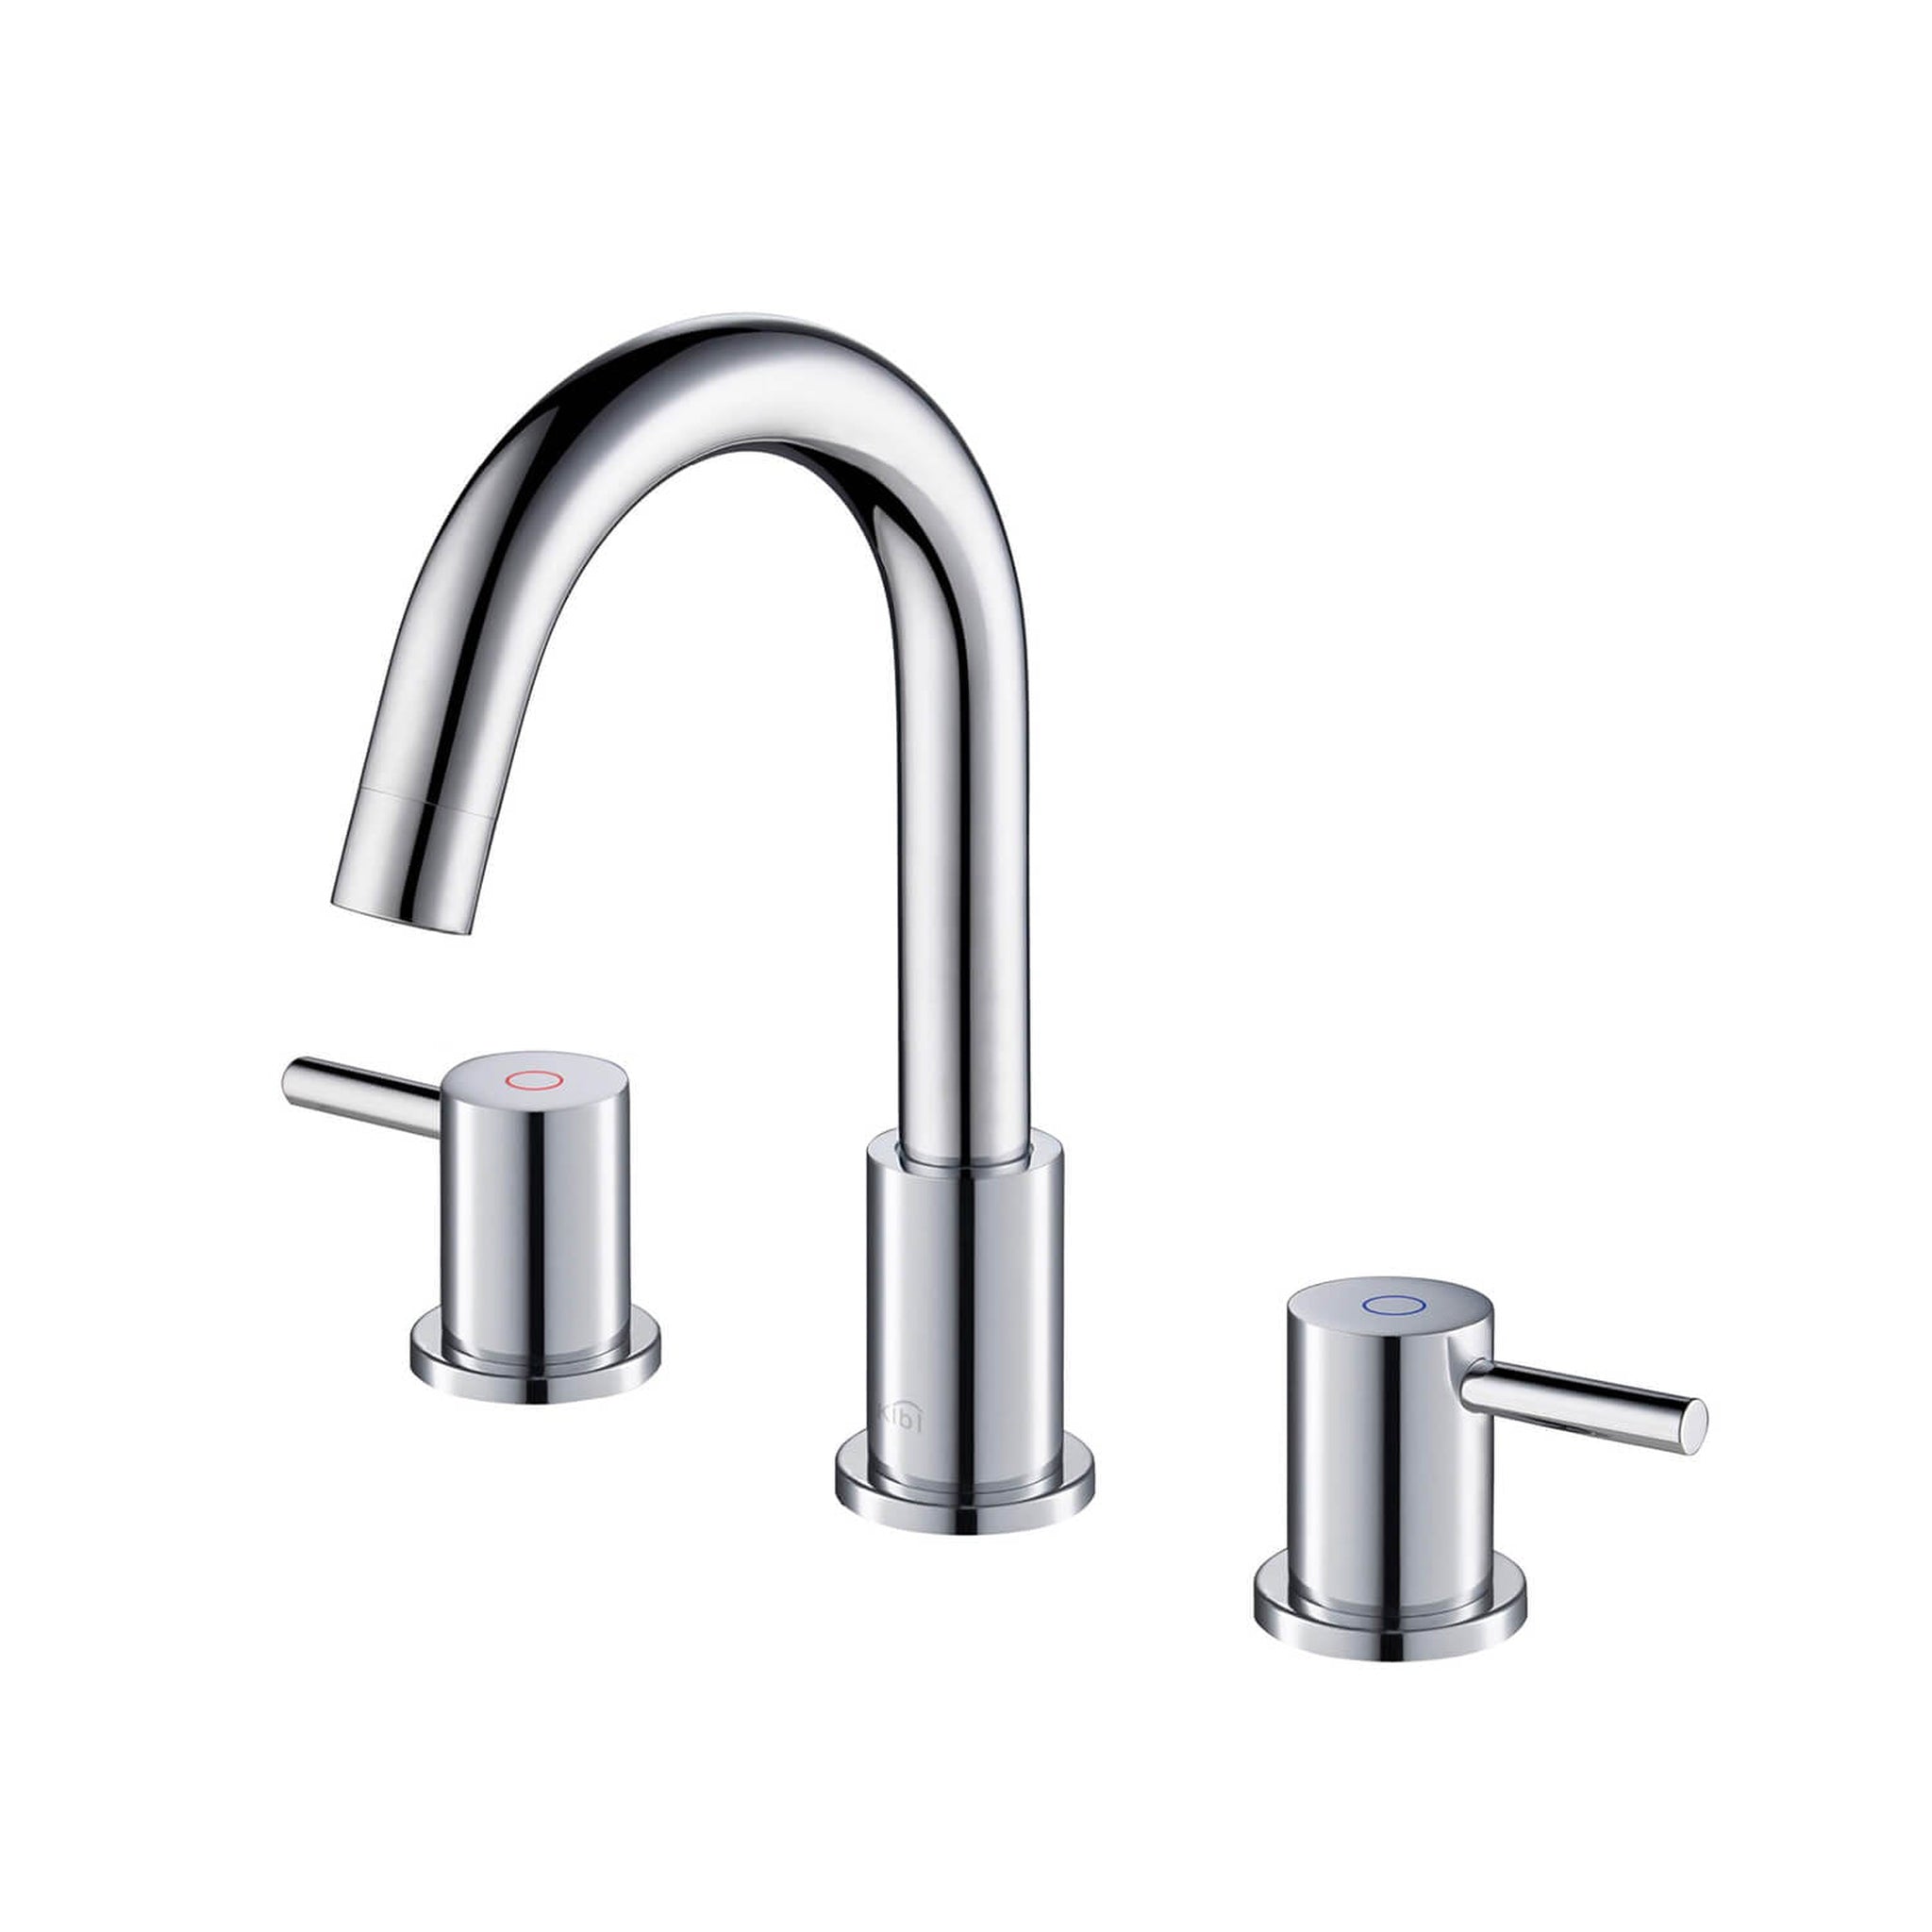 https://cdn.shopify.com/s/files/1/0555/9527/0317/products/KIBI-Circular-8-Widespread-2-Handle-Chrome-Solid-Brass-Bathroom-Sink-Faucet-With-Pop-Up-Drain.jpg?v=1676466023